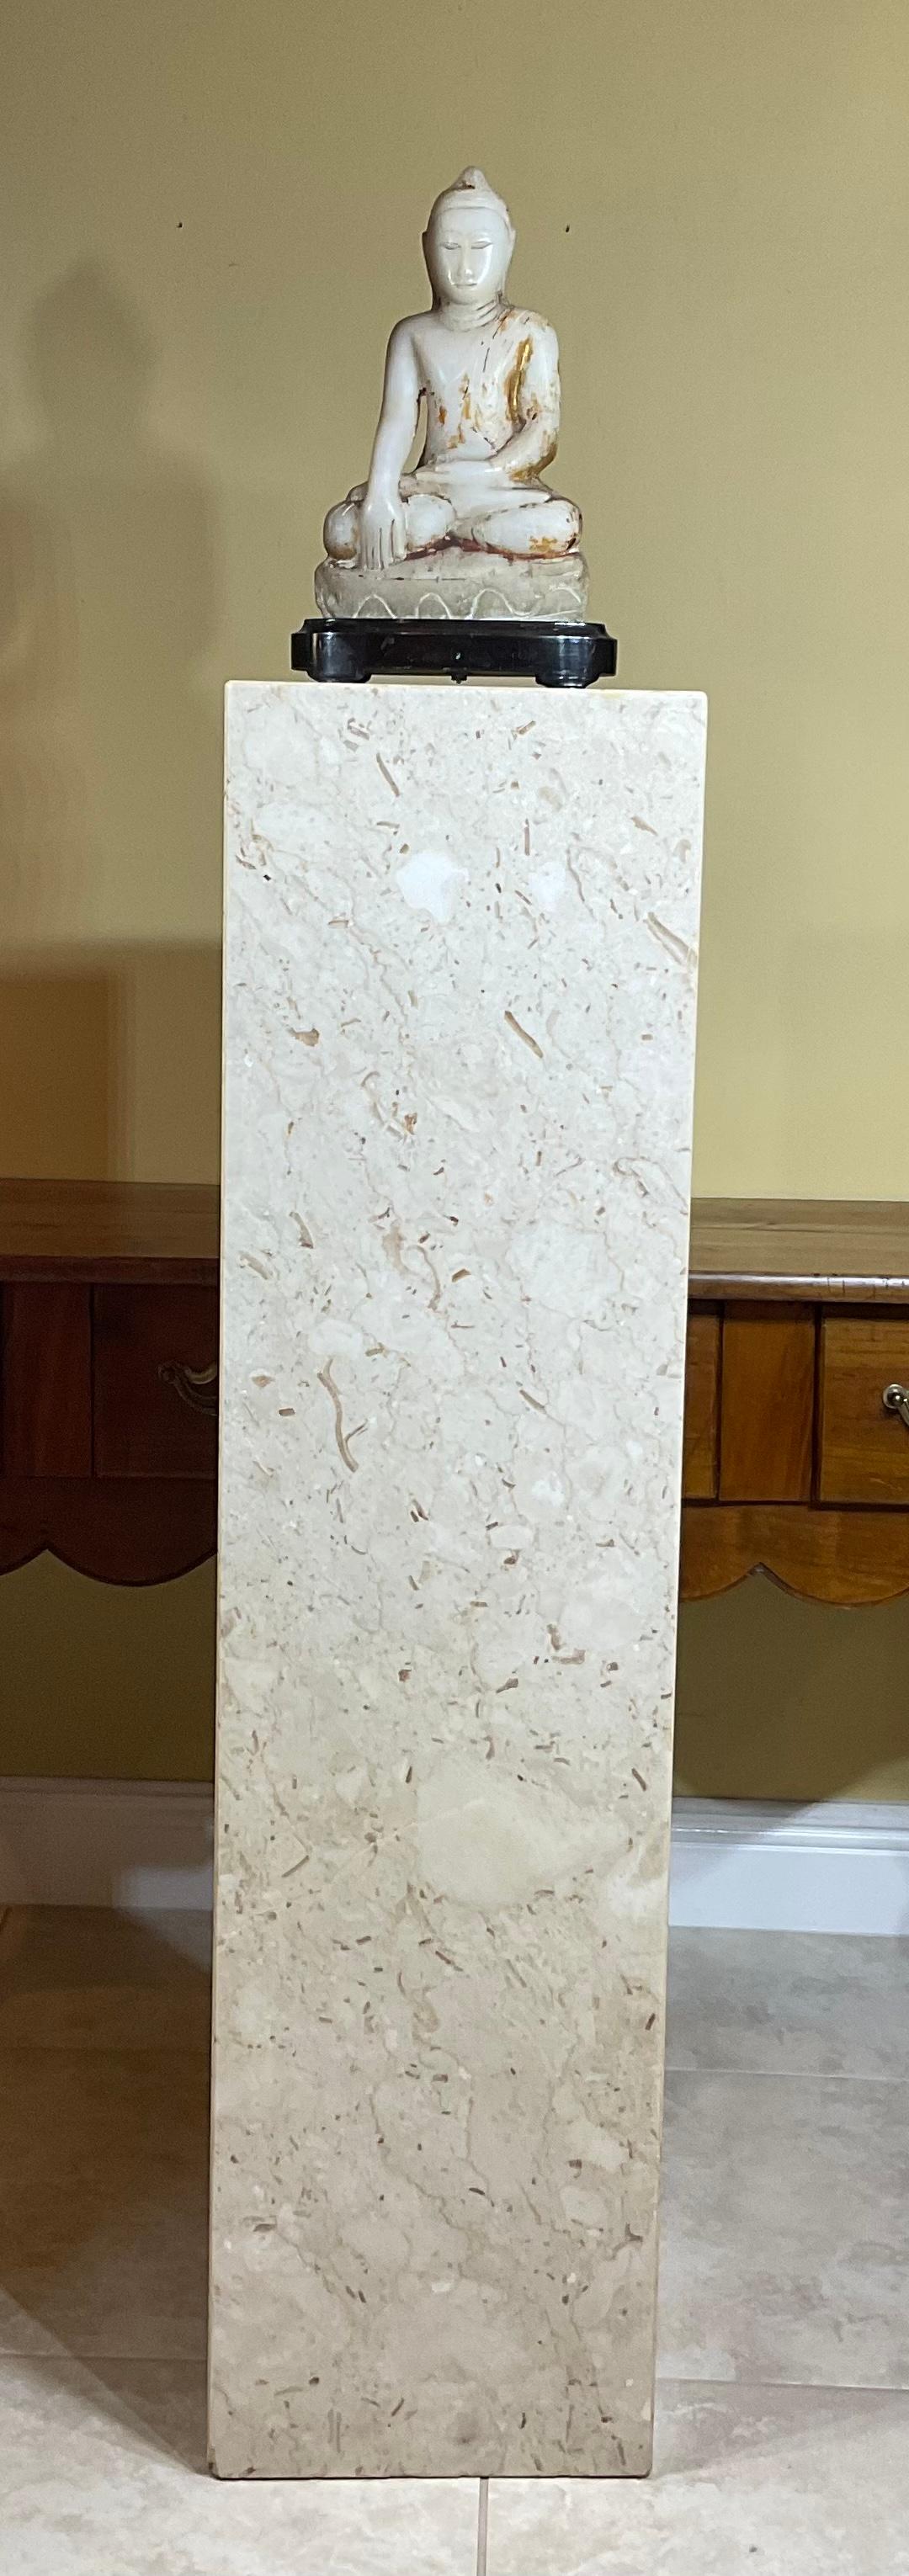 Elegant quality marble base structurally strong, sand color, will be great for your favourite sculpture for many years to go.
Measures: thickness of the walls is 0.75.